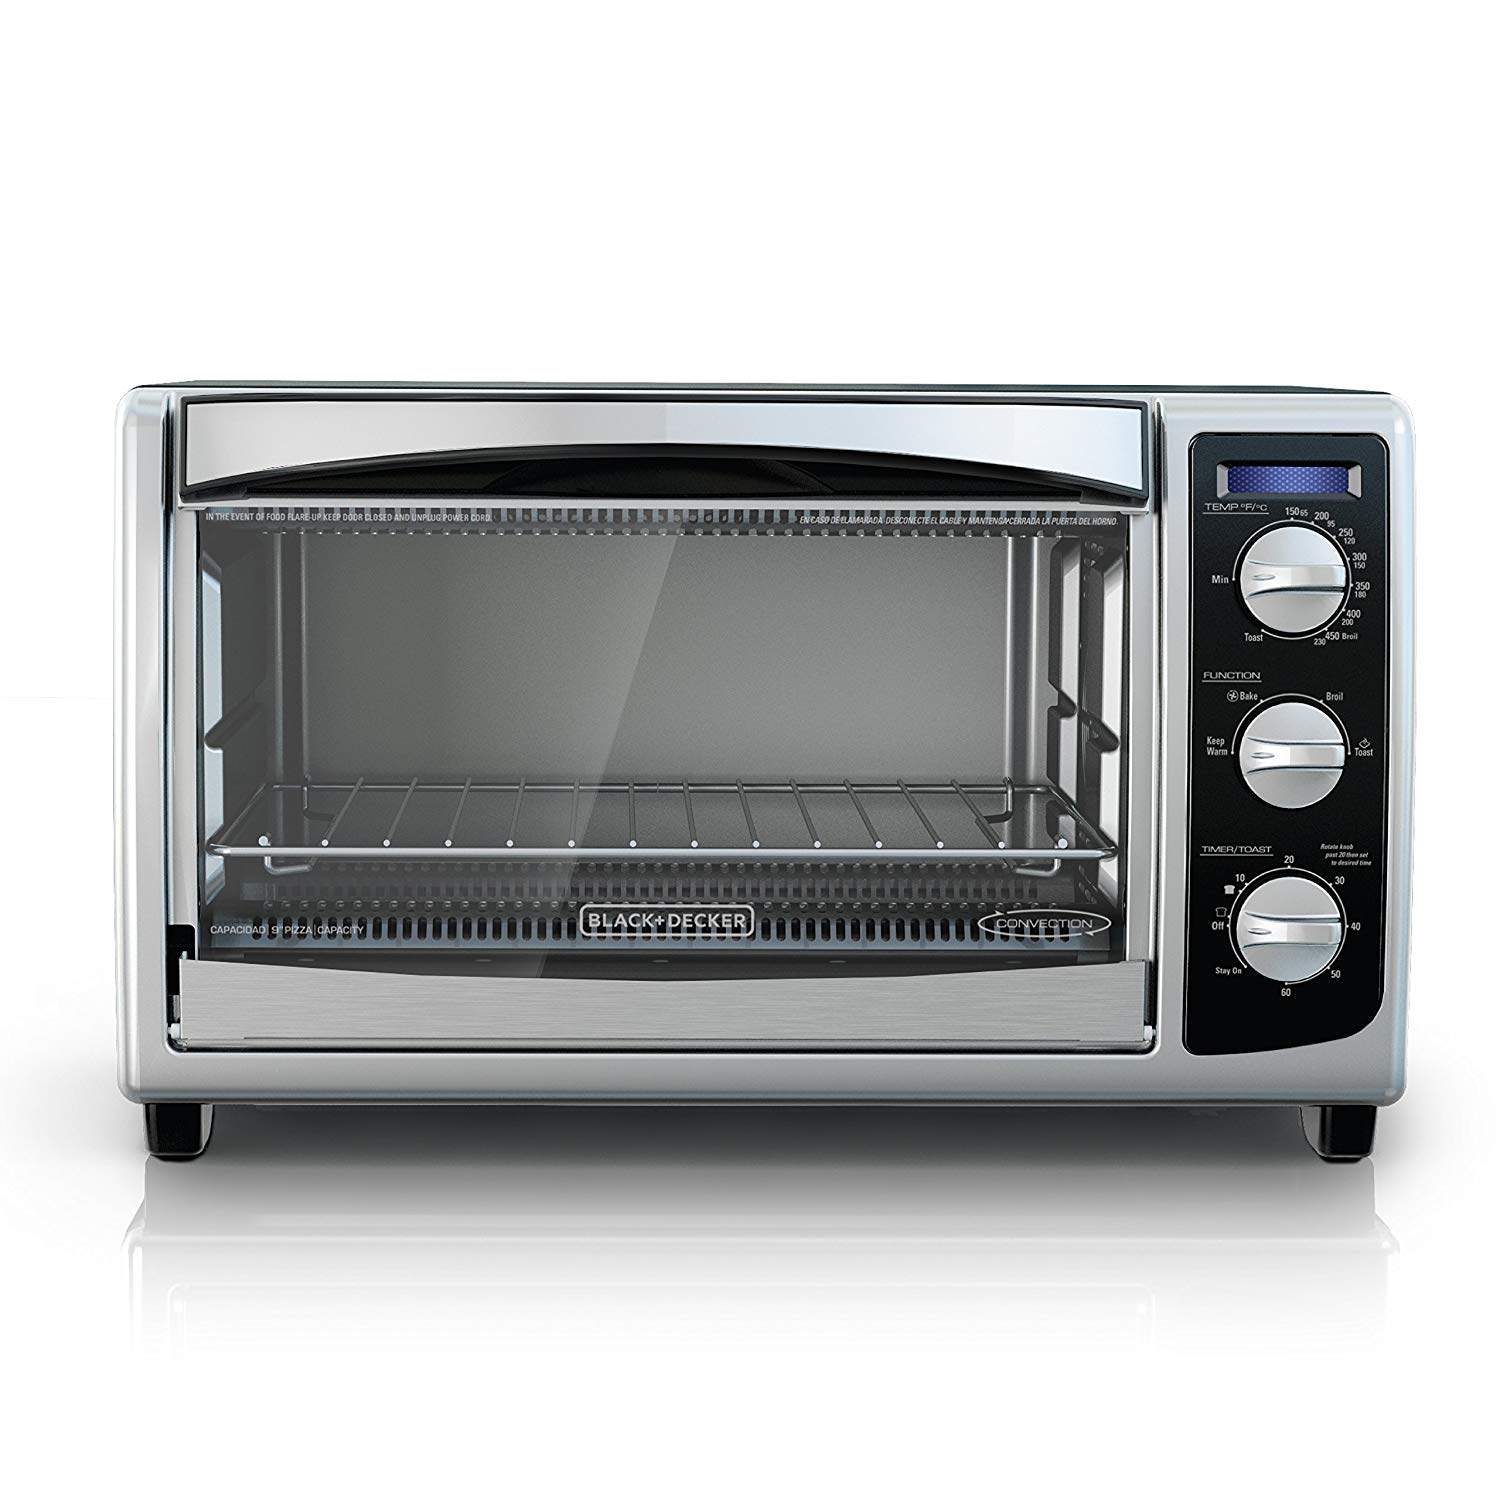 An image related to Black and Decker TO1675B Black Convection Countertop Compact Six Slice Toaster Oven